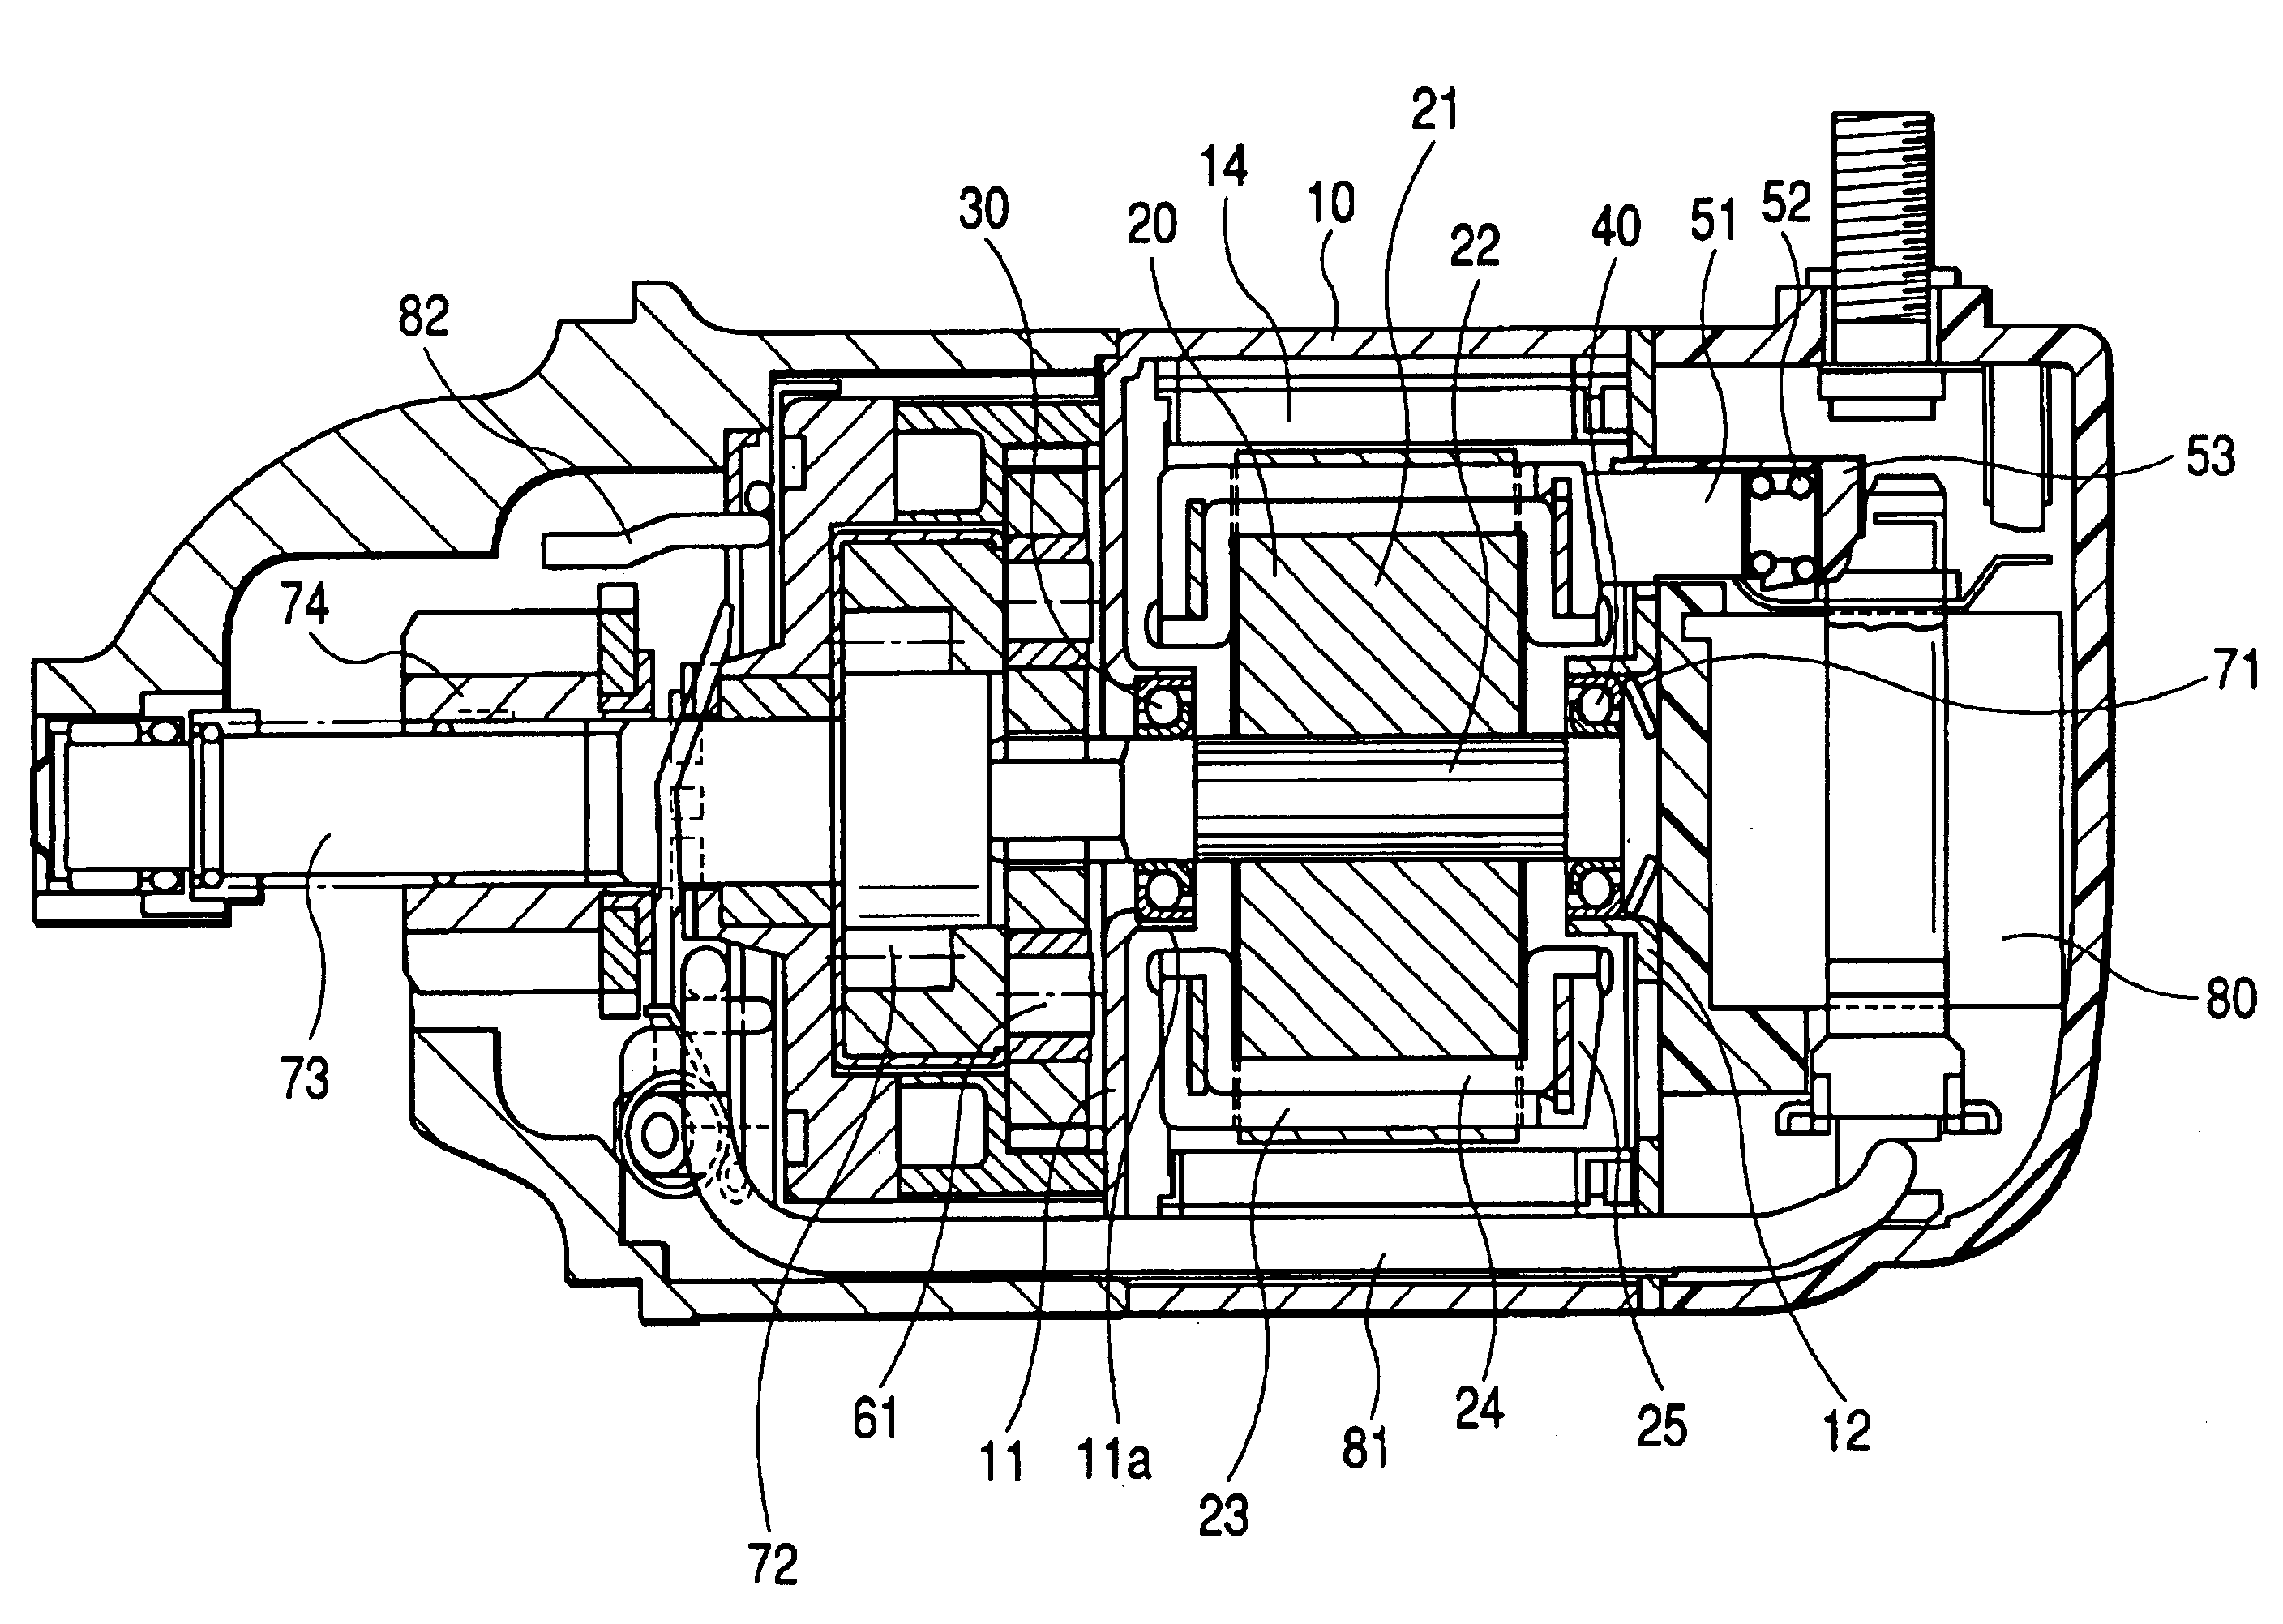 Armature support structure of starter for automotive engine